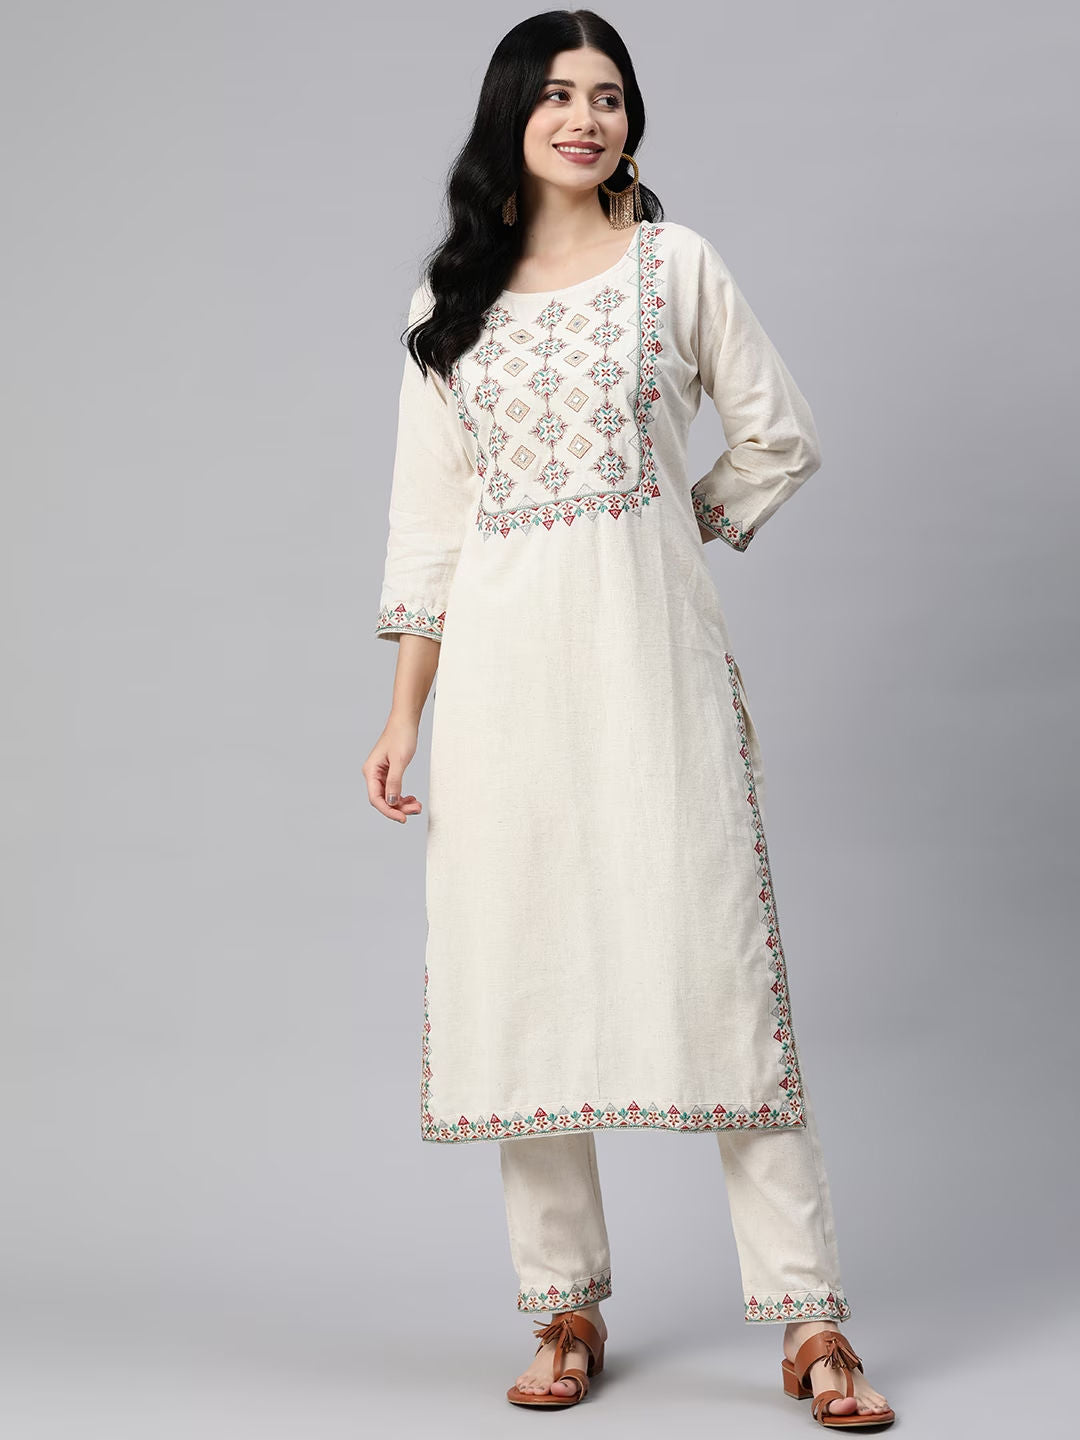 Straight Style Cotton Fabric Off White Color Kurta With Bottom